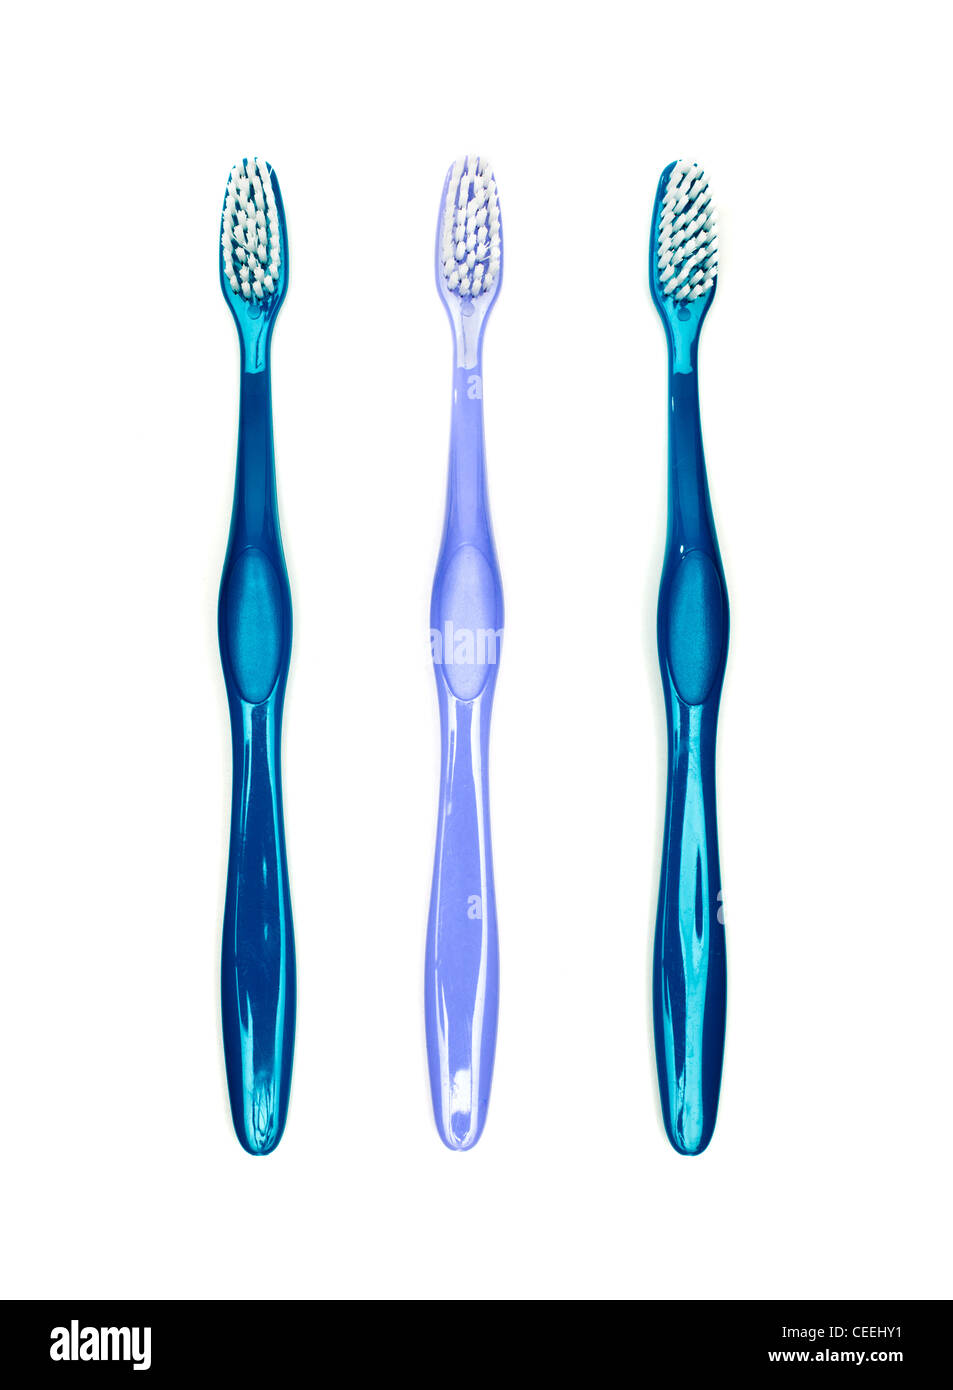 Toothbrushes on white background Stock Photo